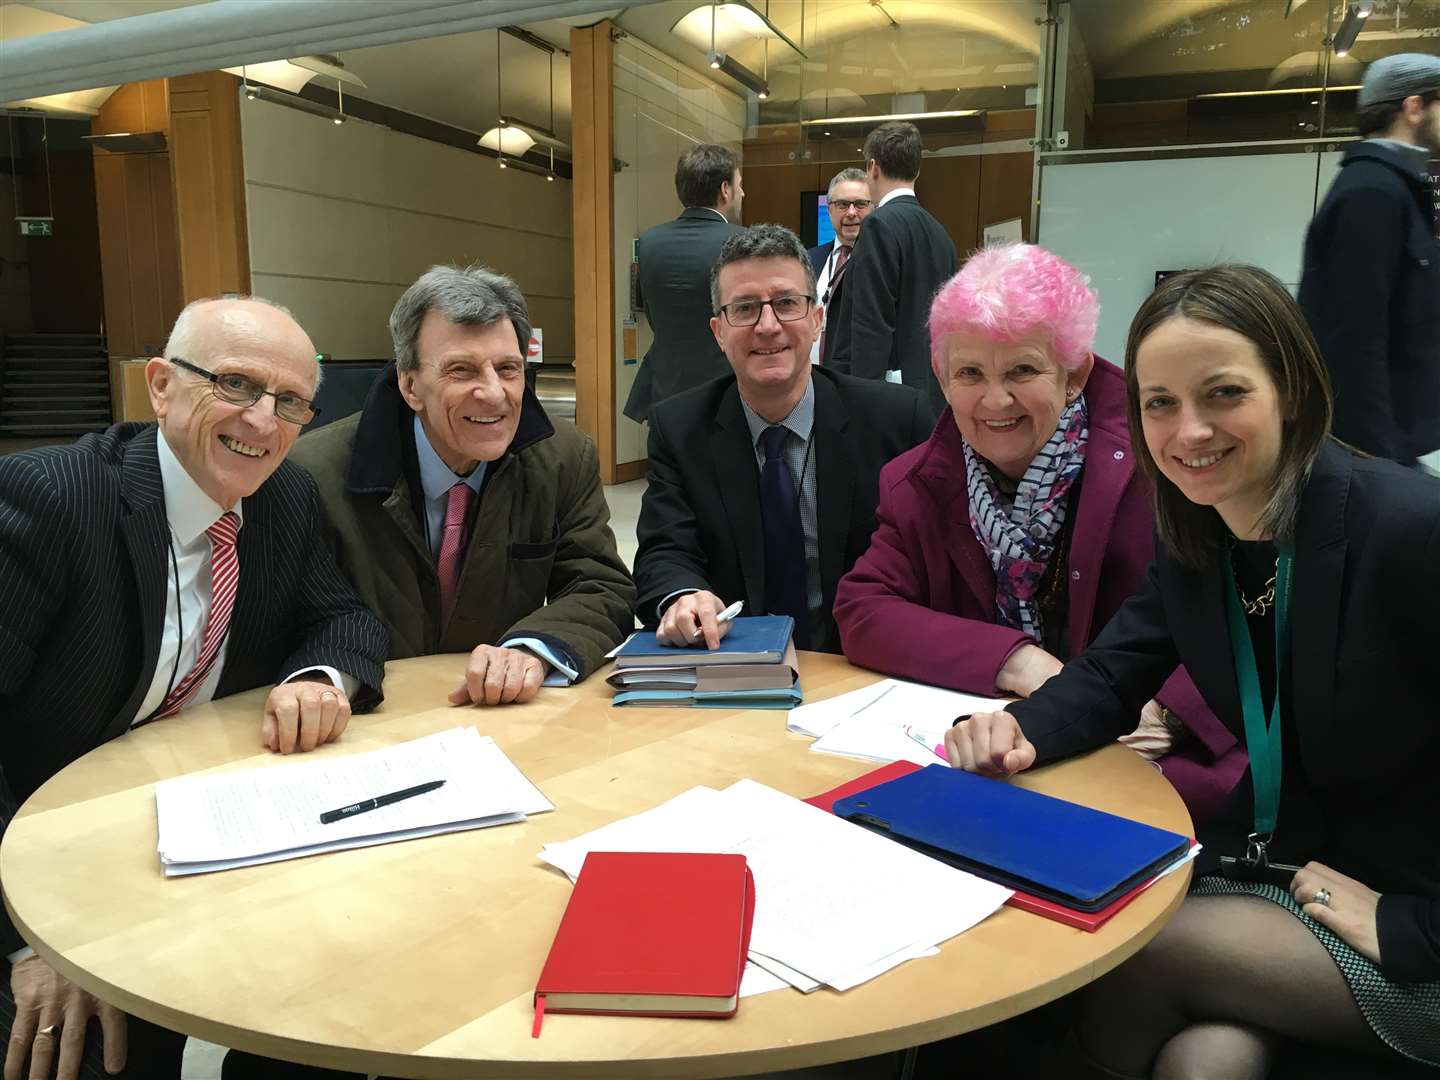 The chairman of the KALC transport advisory committee John Wilson, KALC vice president Richard Perry, KALC chief executive Terry Martin and KALC chairman Sarah Barker meet Helen Whately MP at Westminster.